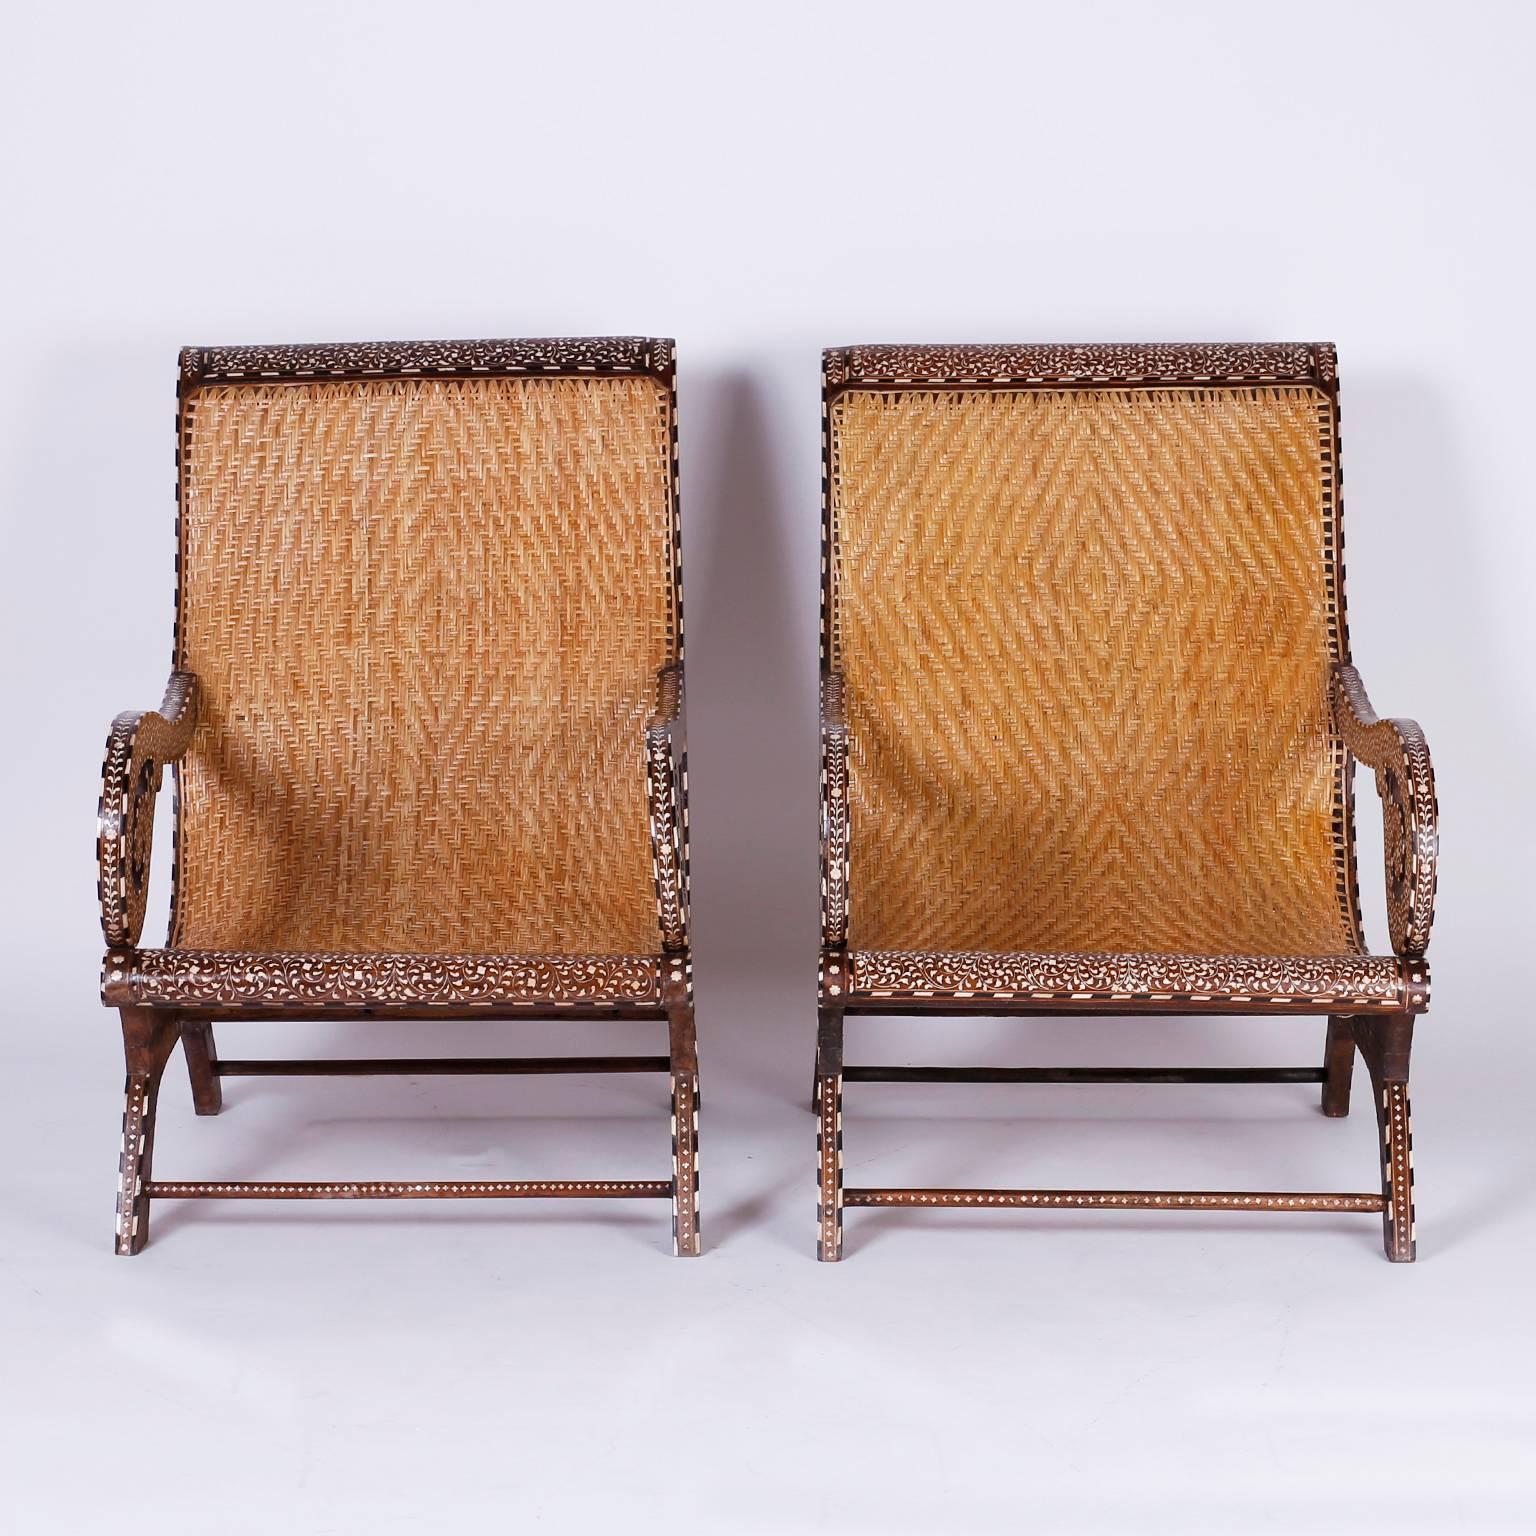 Pair of dashing hand caned Anglo-Indian plantation chairs crafted in rosewood with a dramatic form and decorated with inlaid bone and ebony. Perfect for West Indies and British Colonial interior.